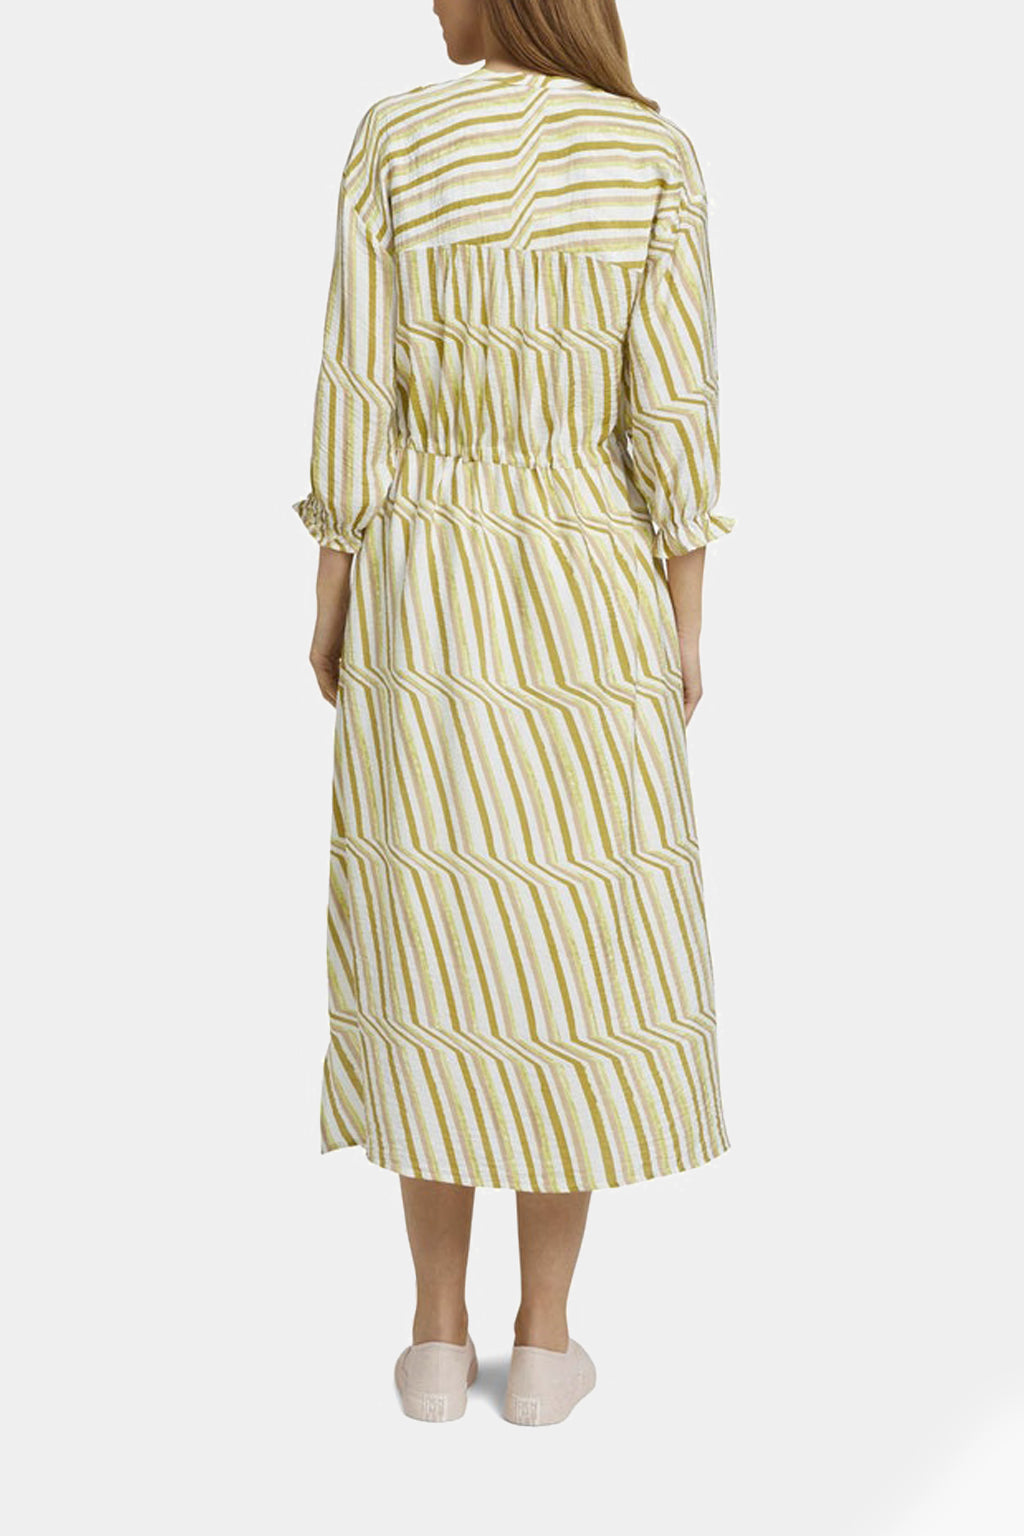 Tom Tailor - Patterned Dress With Waist Band